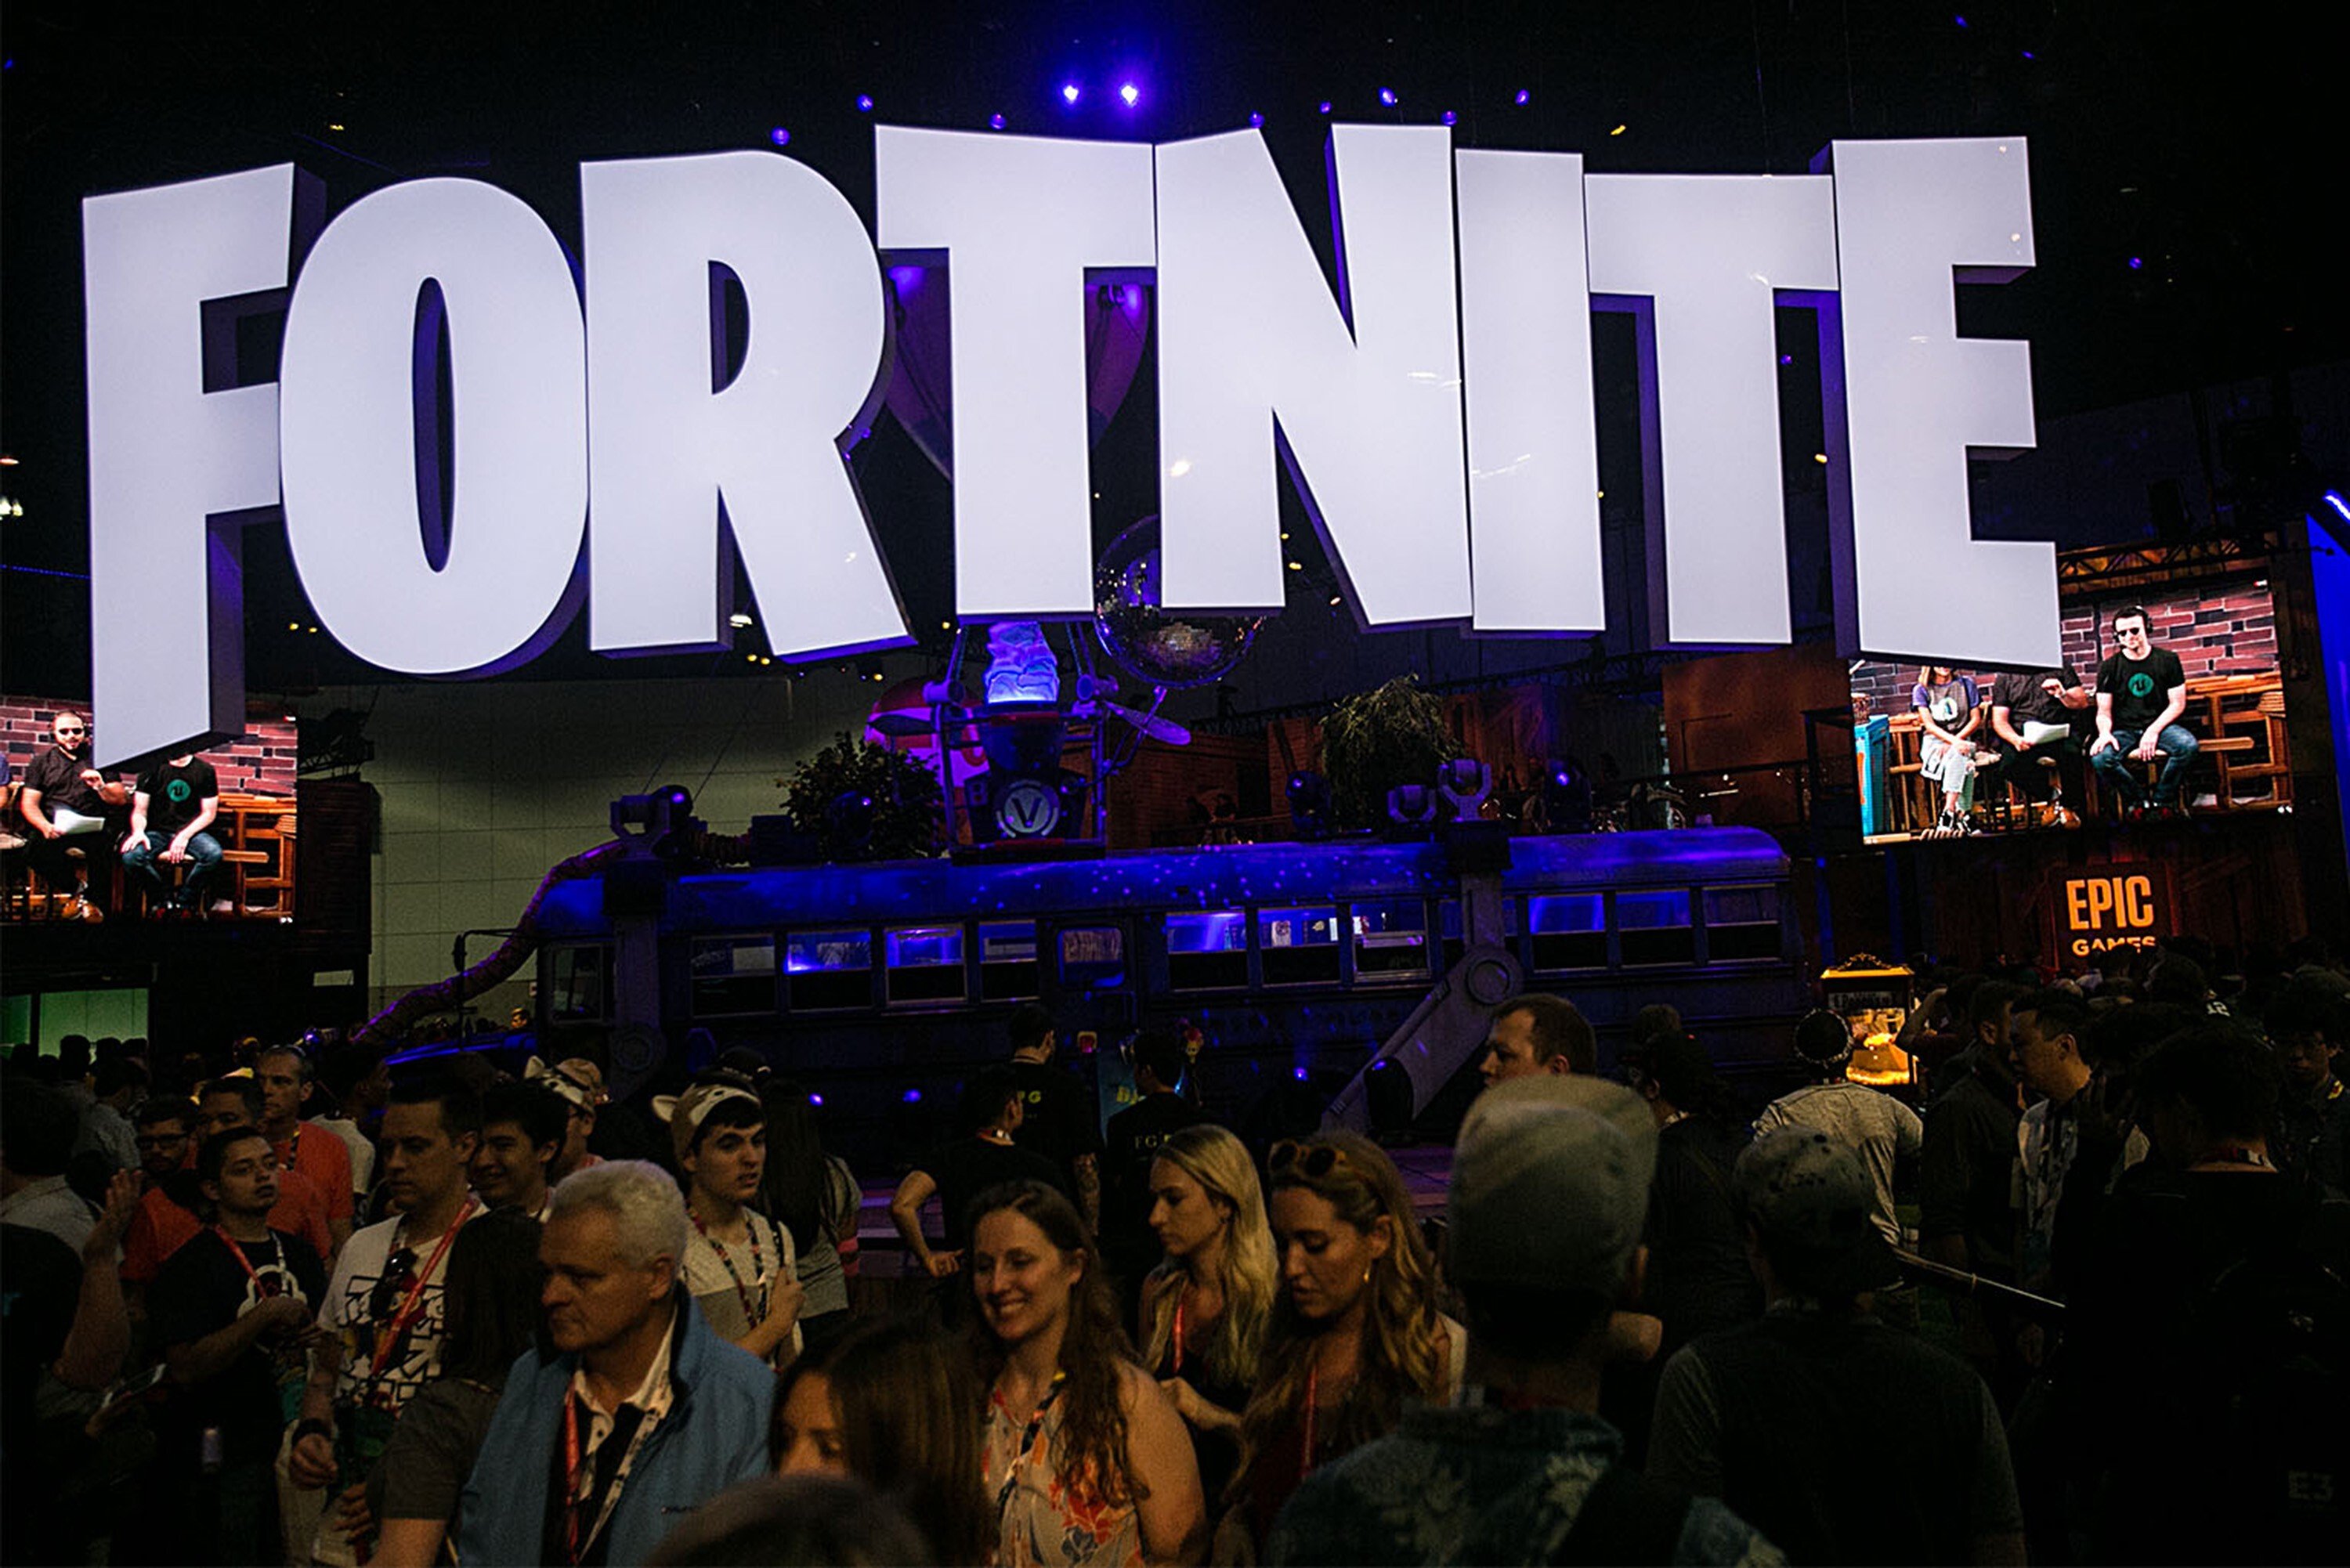 Due to the legal row, Fortnite fans using iPhones or other Apple devices no longer have access to the latest game updates. Photo: Zuma Press/TNS